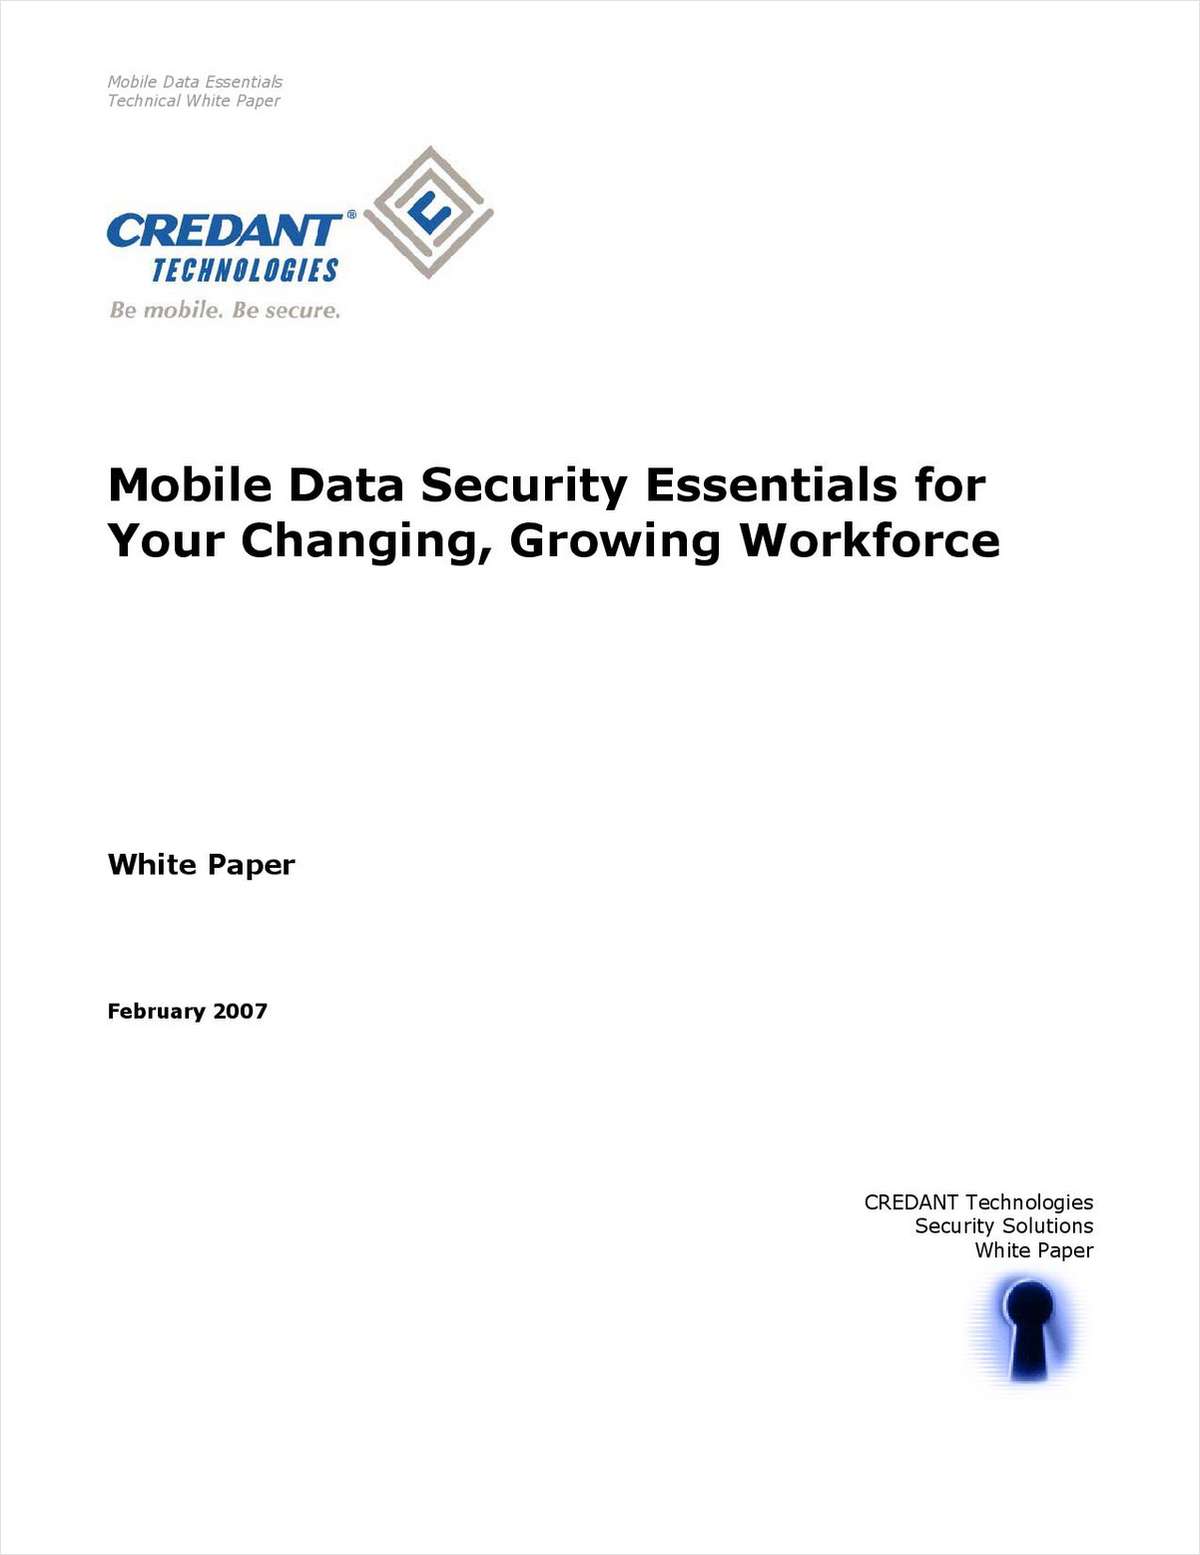 Mobile Security Essentials for a Dynamic Workforce